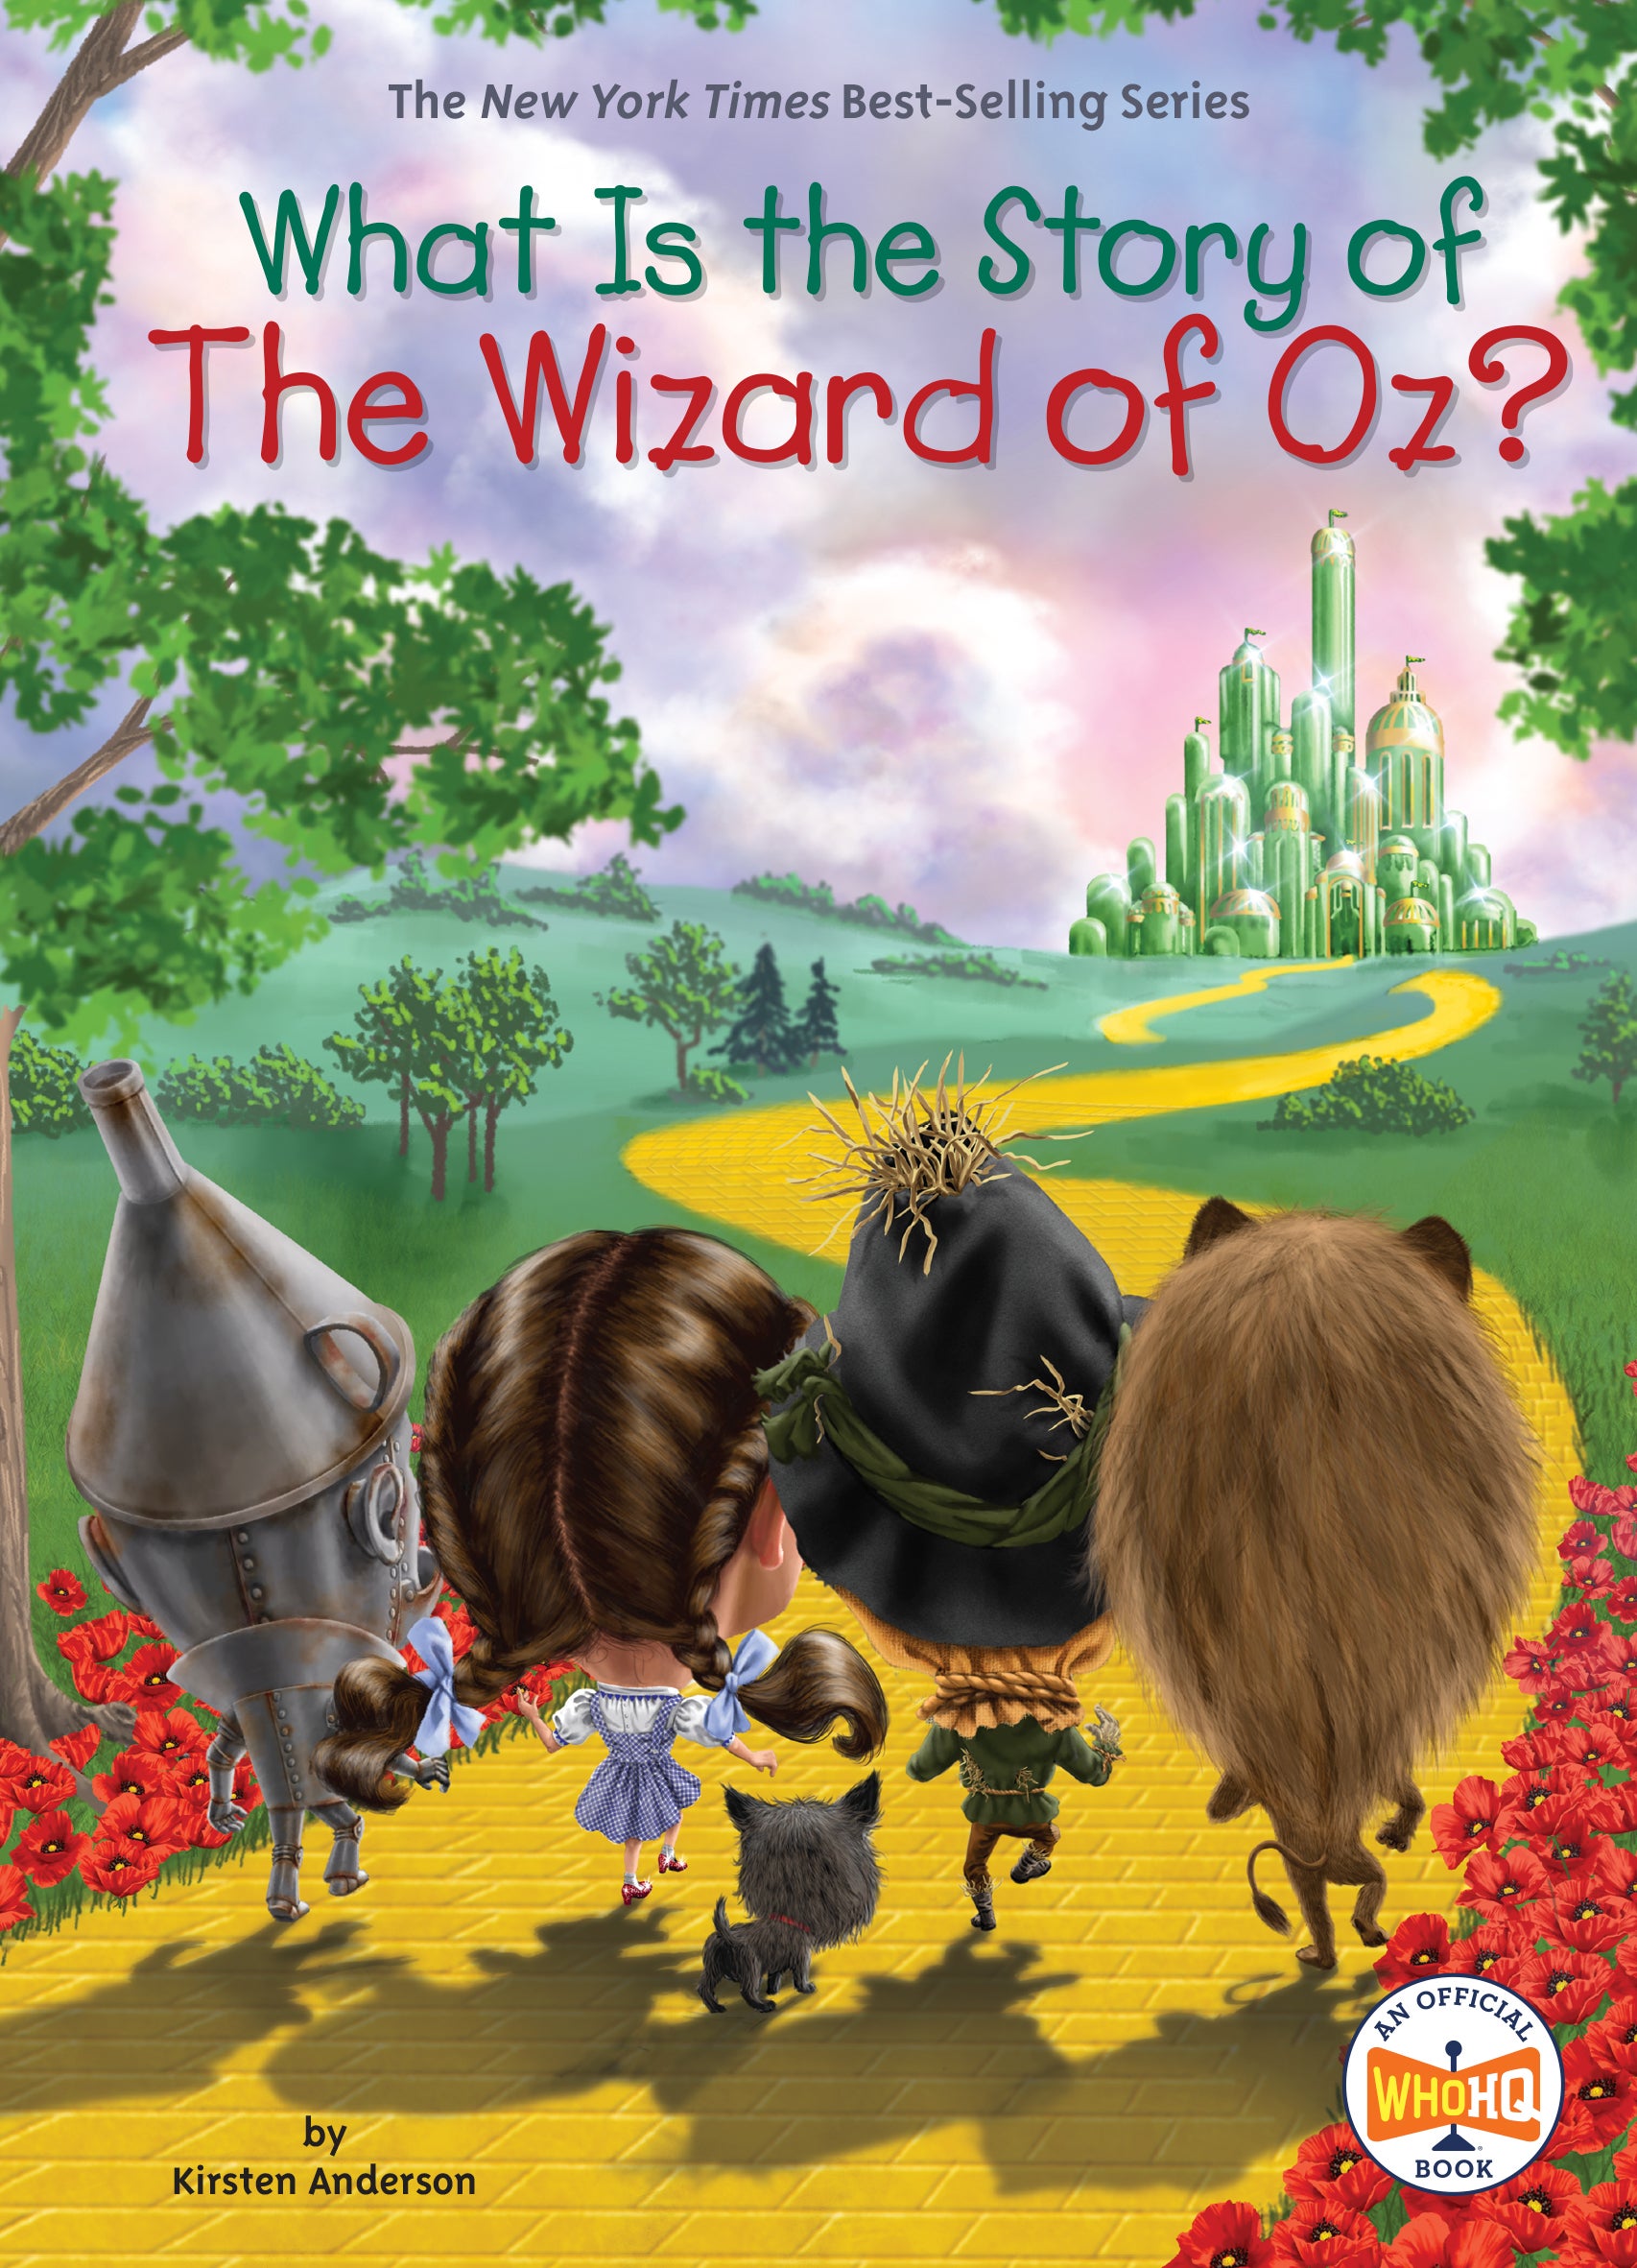 the wizard of oz book